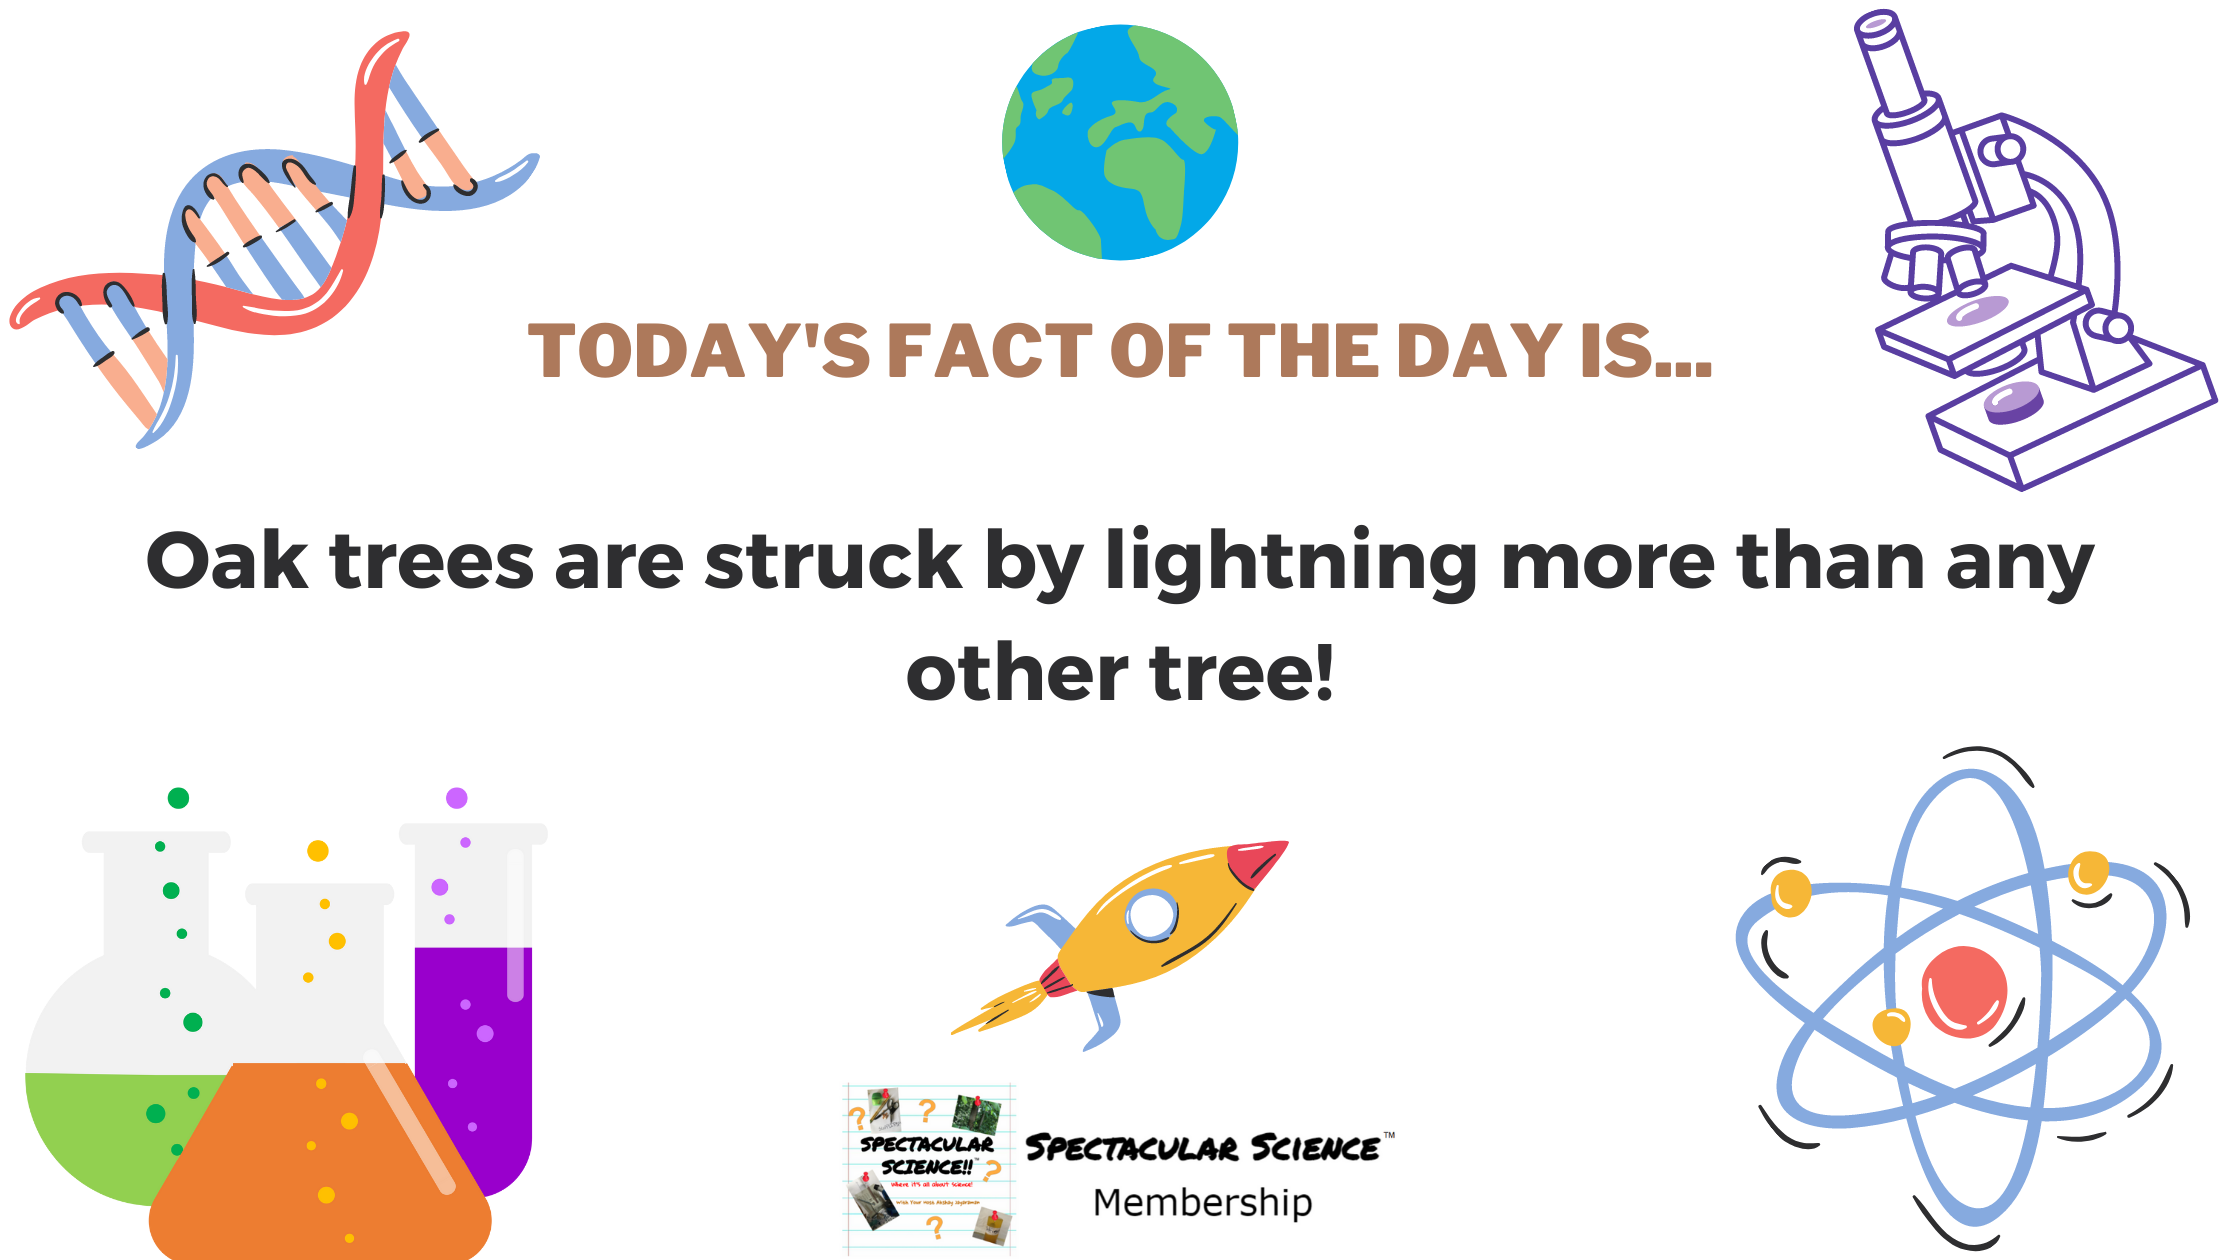 Fact of the Day Image Apr. 30th